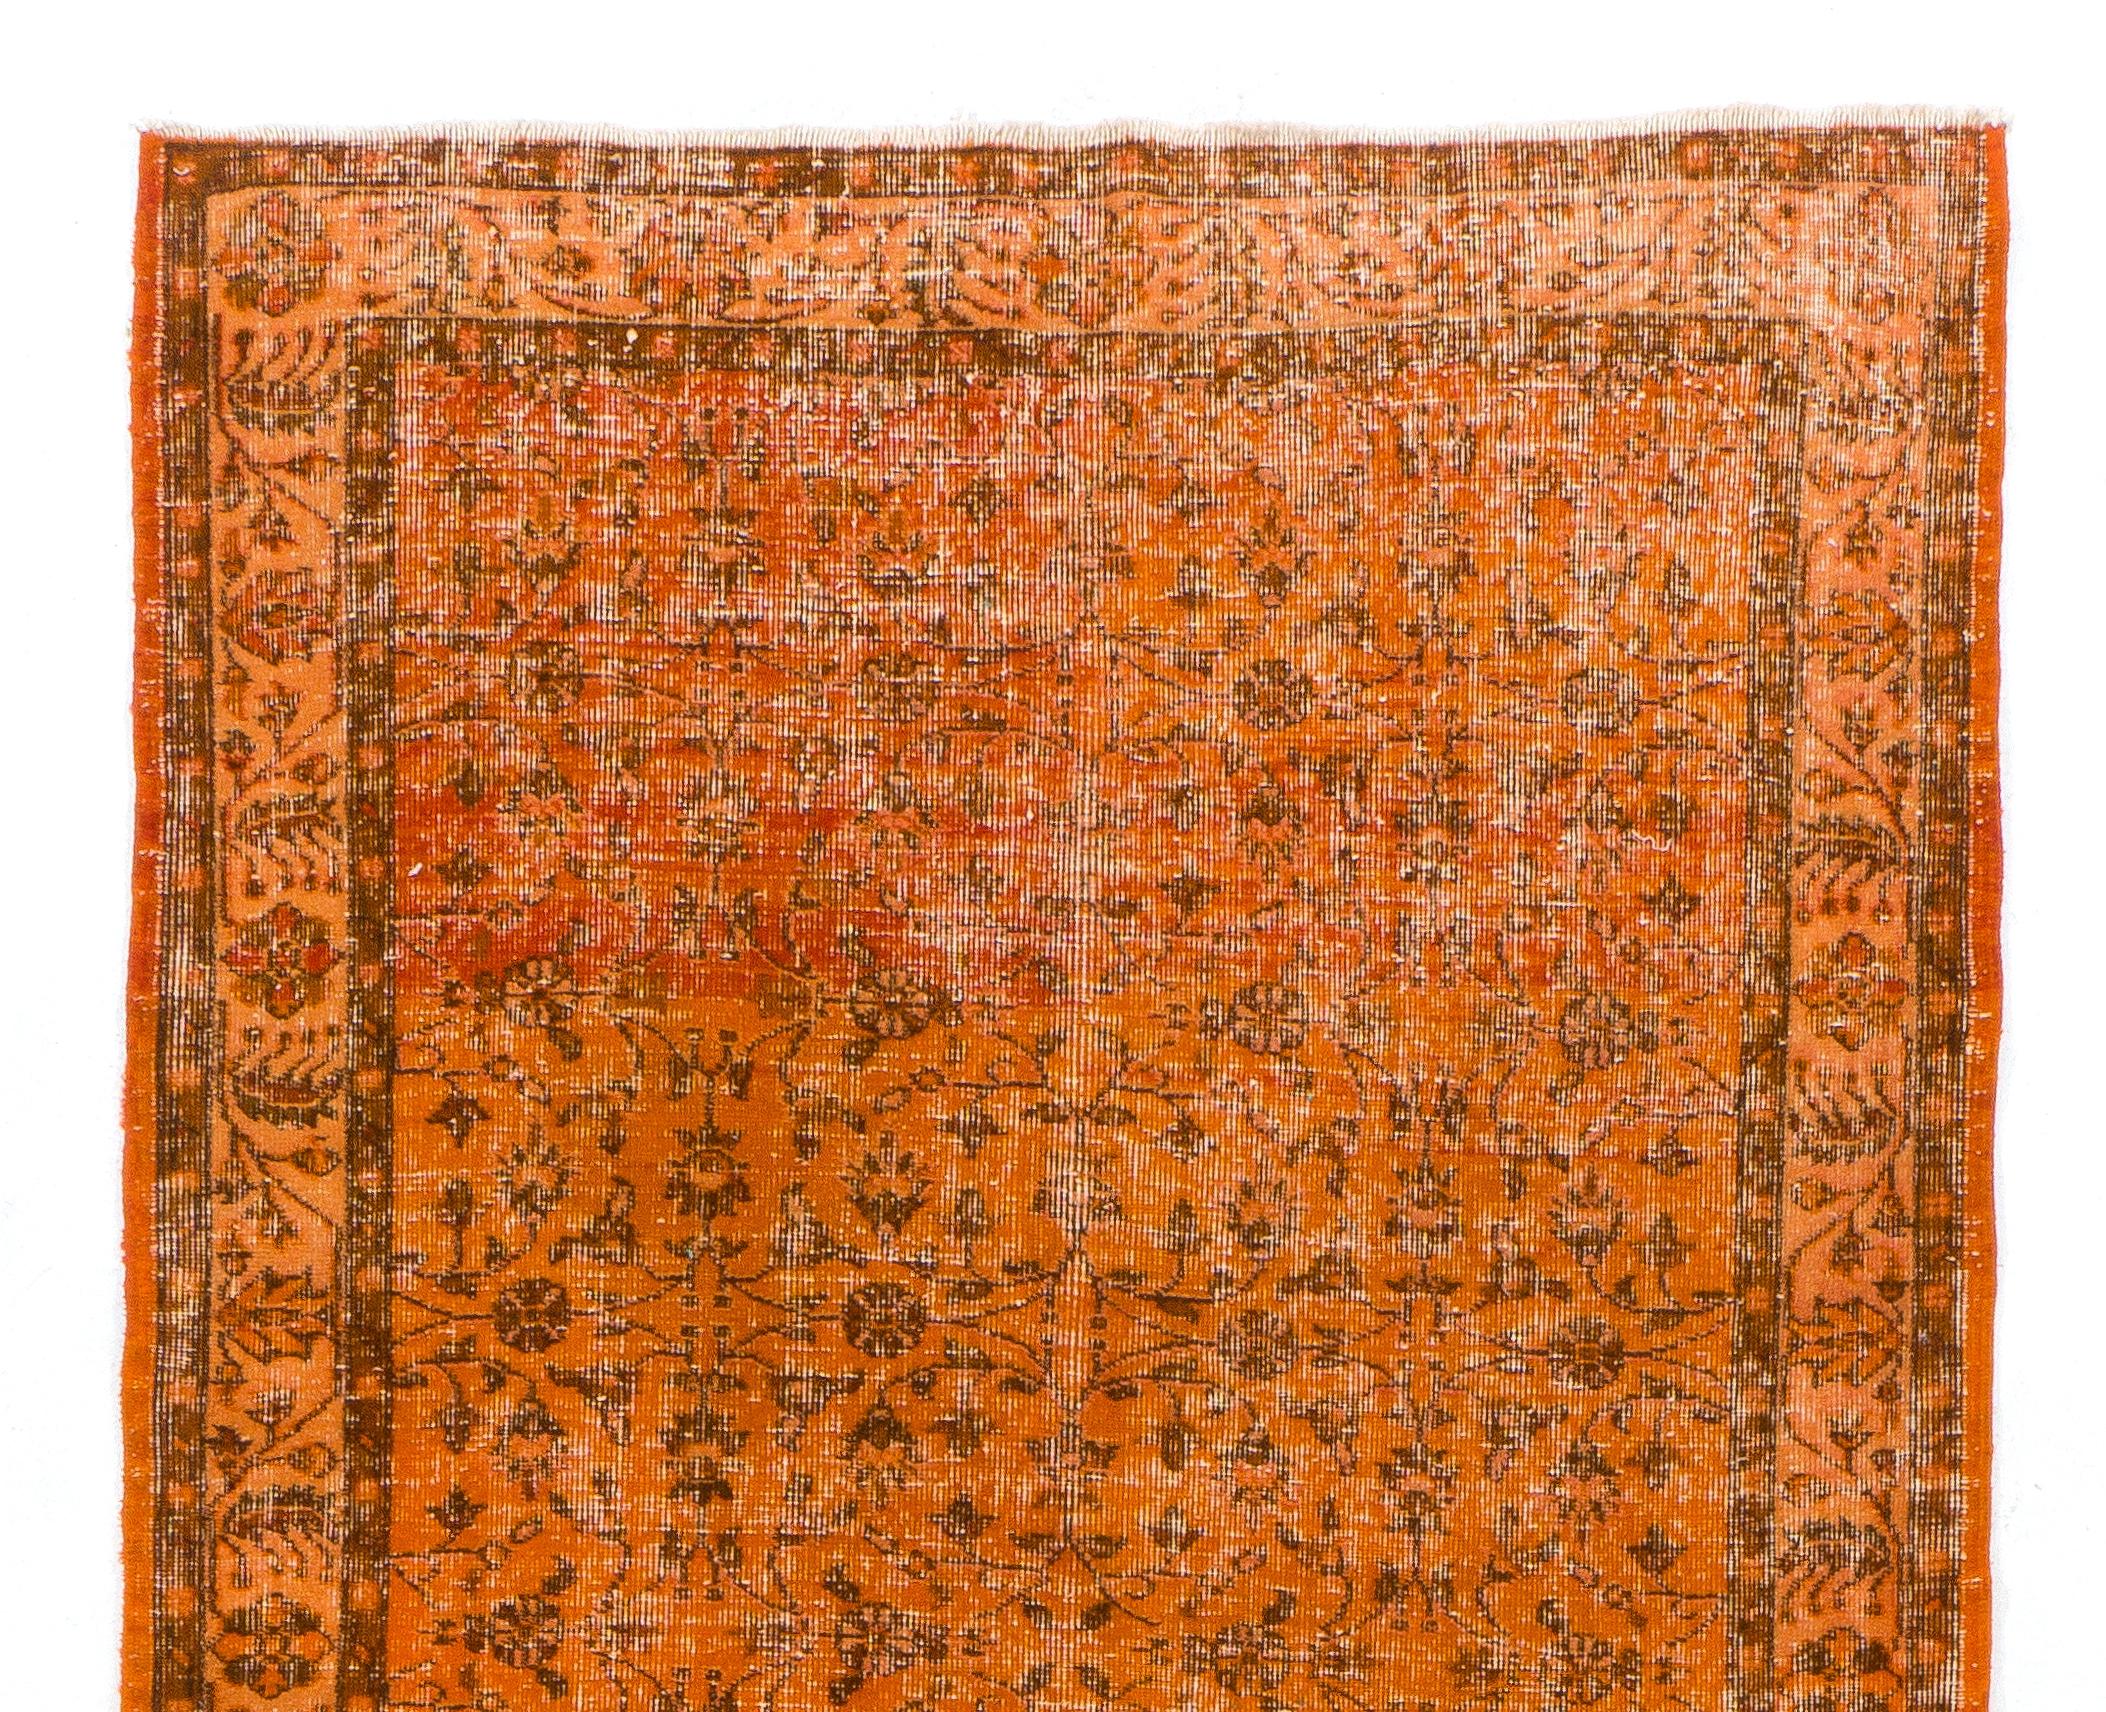 A vintage floral Turkish runner rug re-dyed in orange color. Great for contemporary interiors.
Finely hand knotted, low wool pile on cotton foundation. Professionally washed.
Sturdy and can be used on a high traffic area, suitable for both